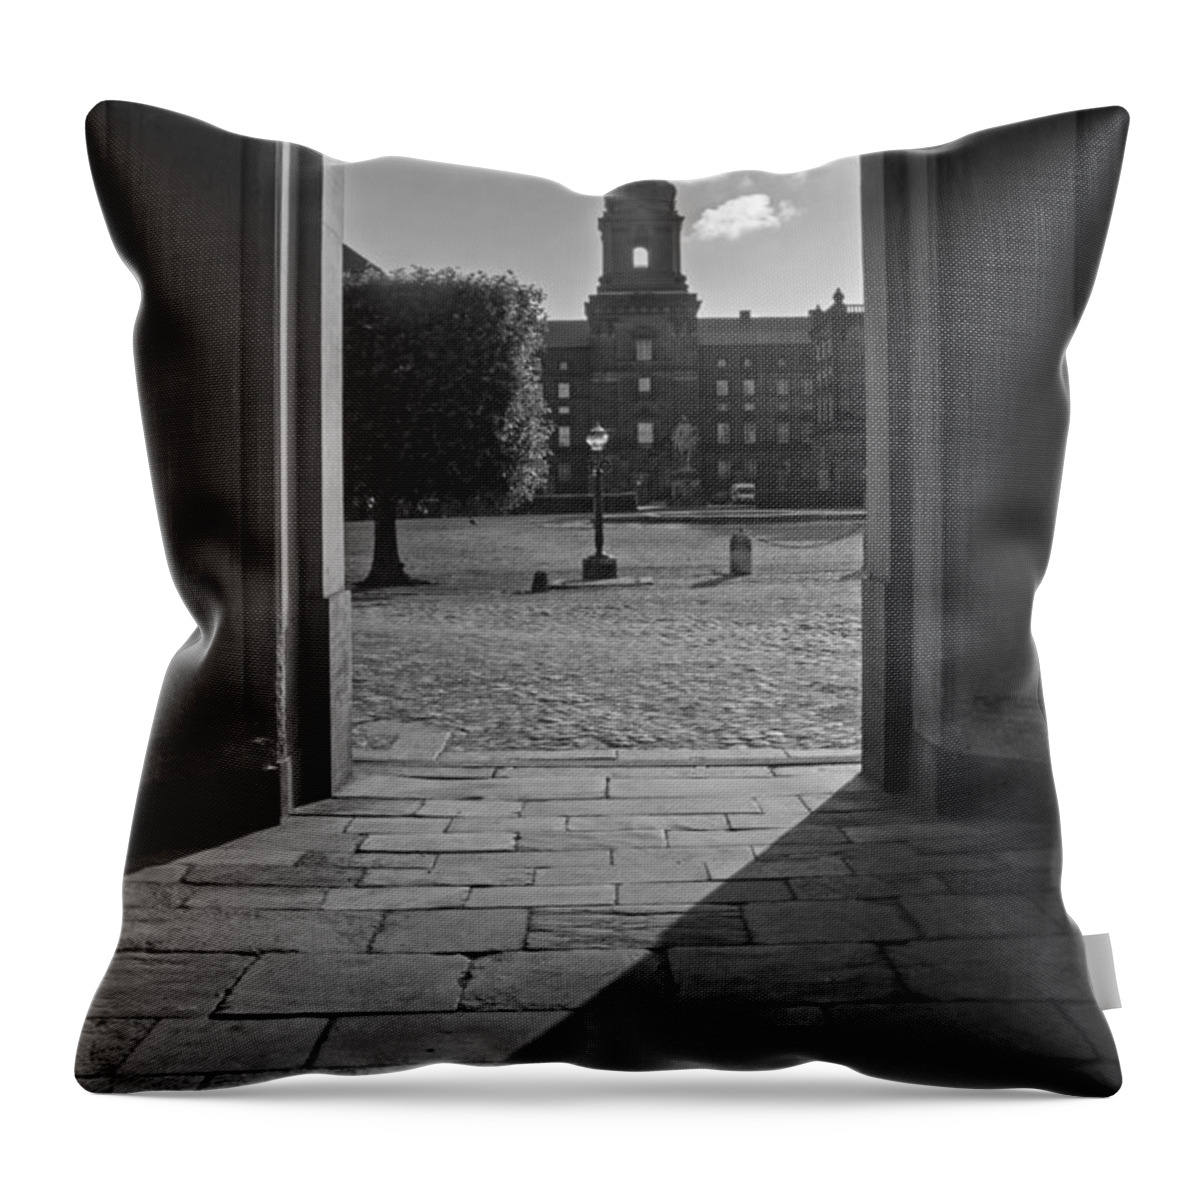 Christiansborg Castle Throw Pillow featuring the photograph Christiansborg Castle #3 by Inge Riis McDonald